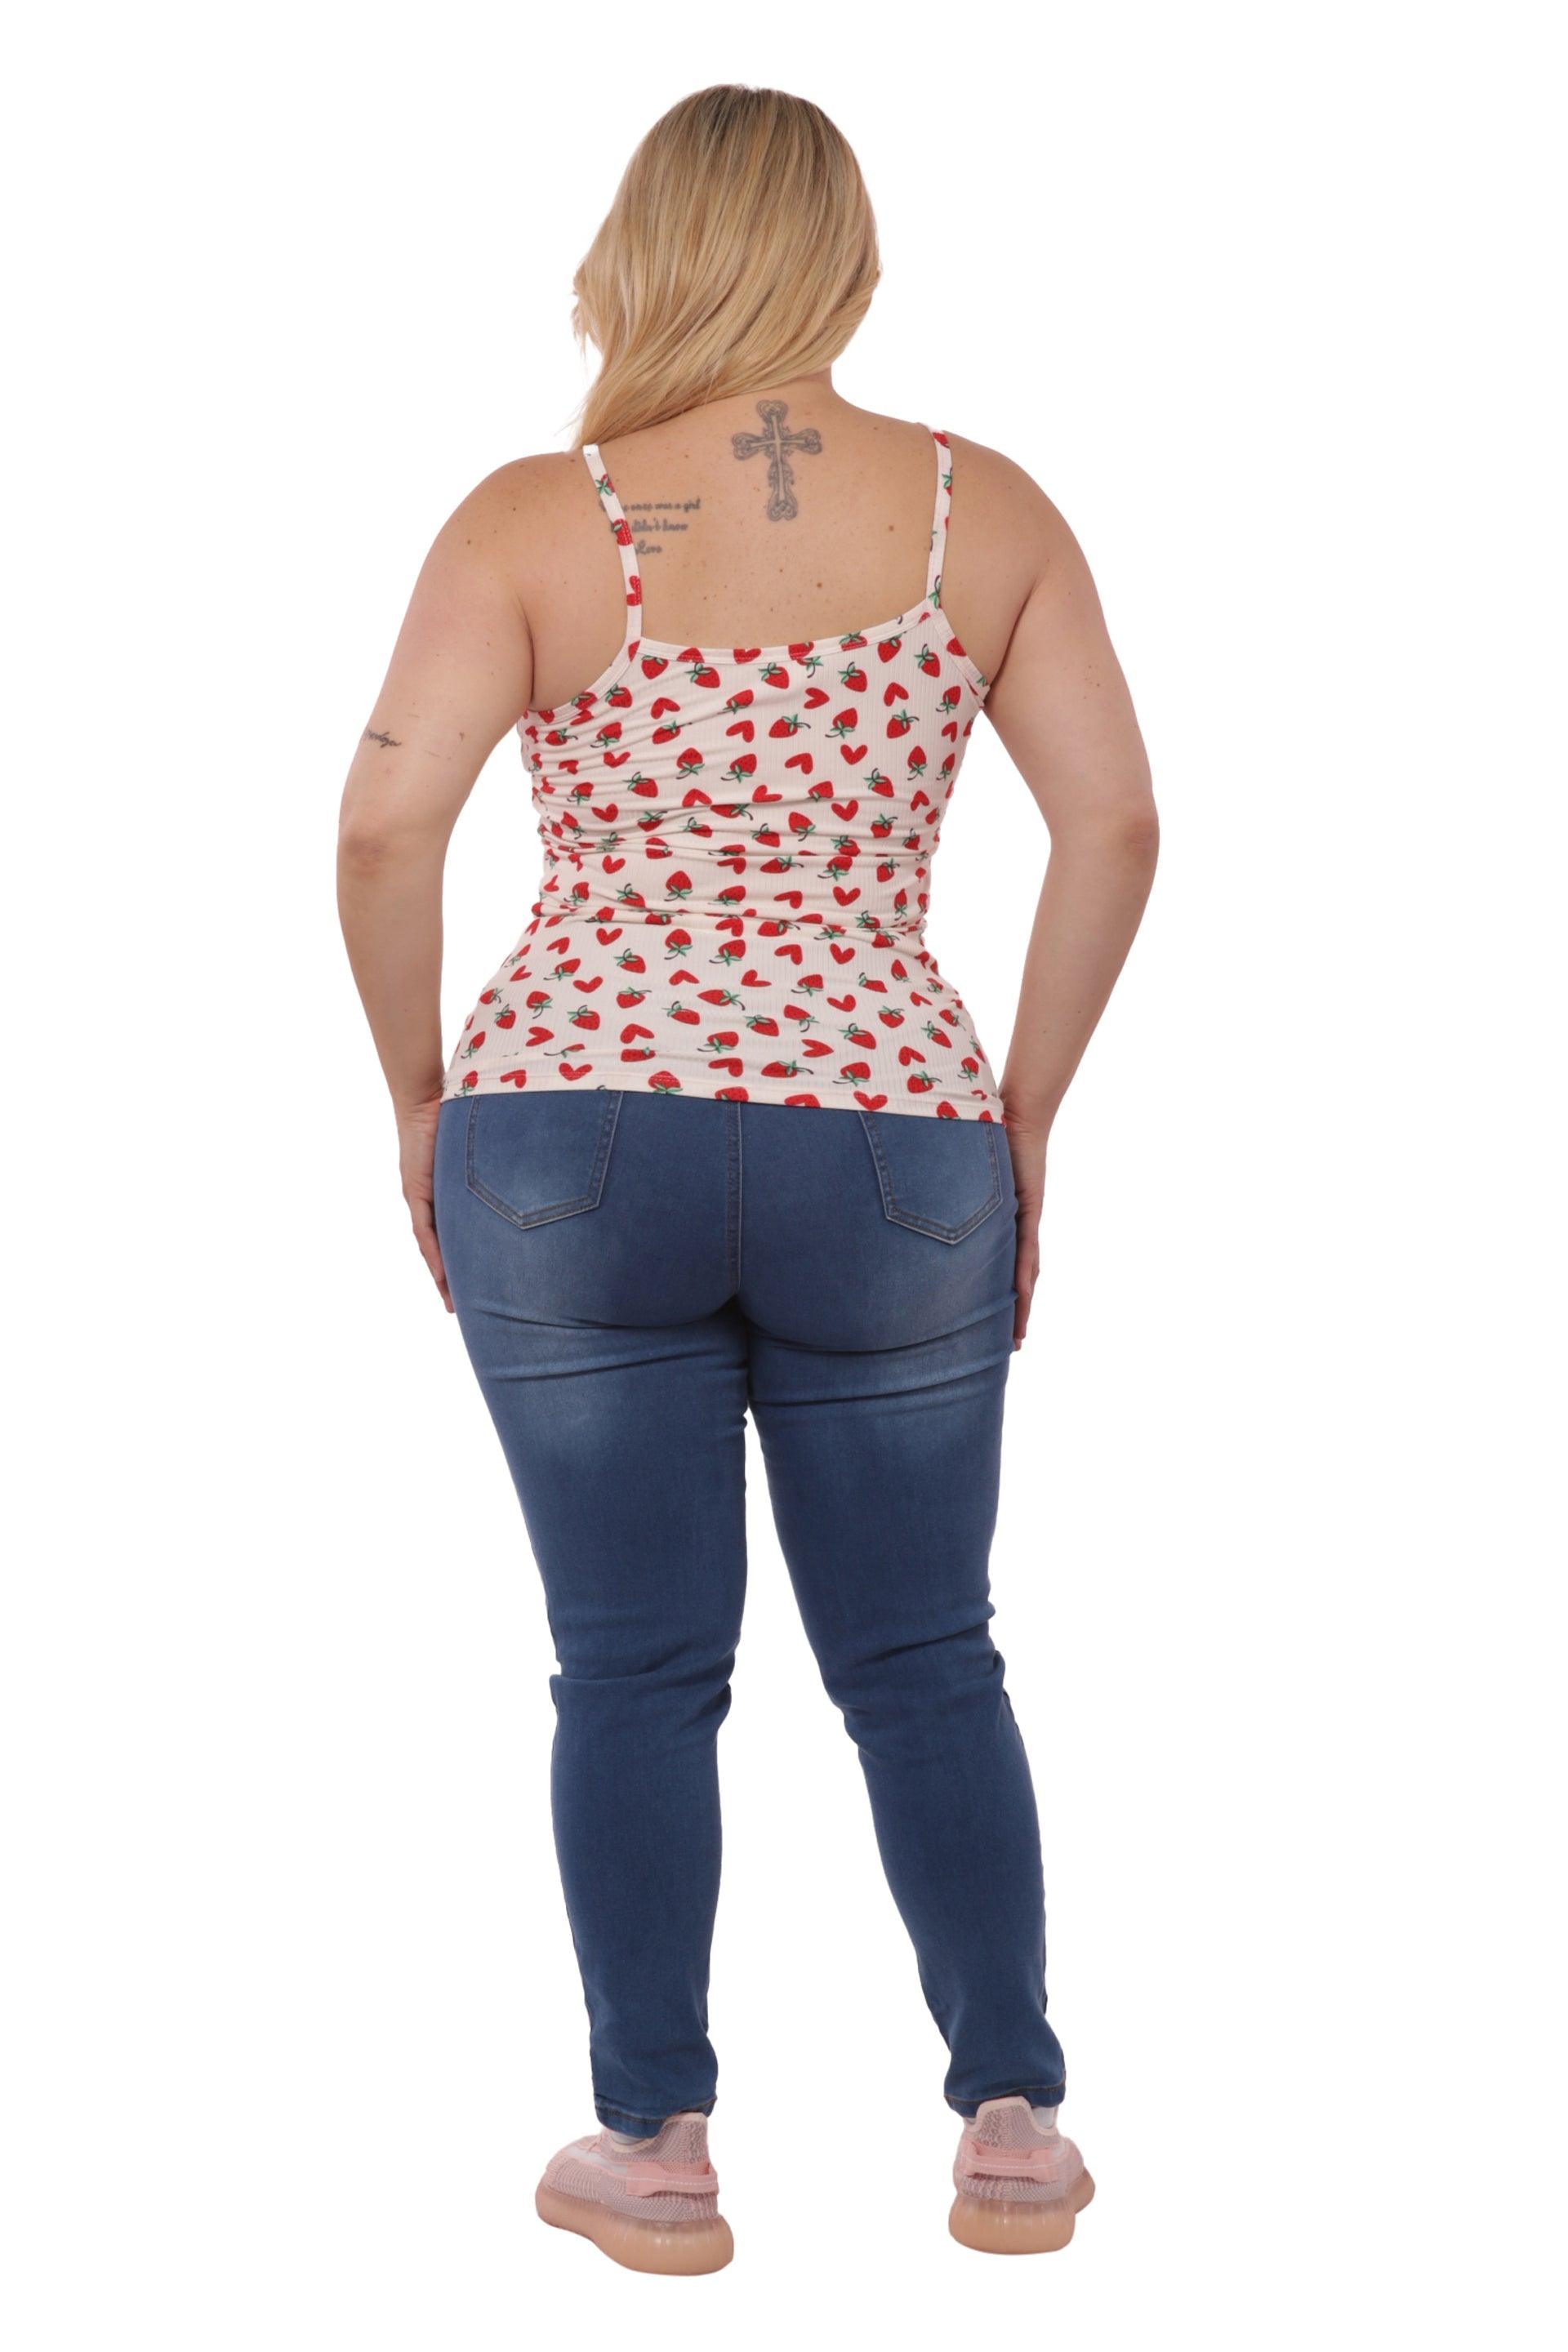 Plus Size Lace-Up Tank Ribbed Tops - Red & White Strawberry Hearts - SHOSHO Fashion